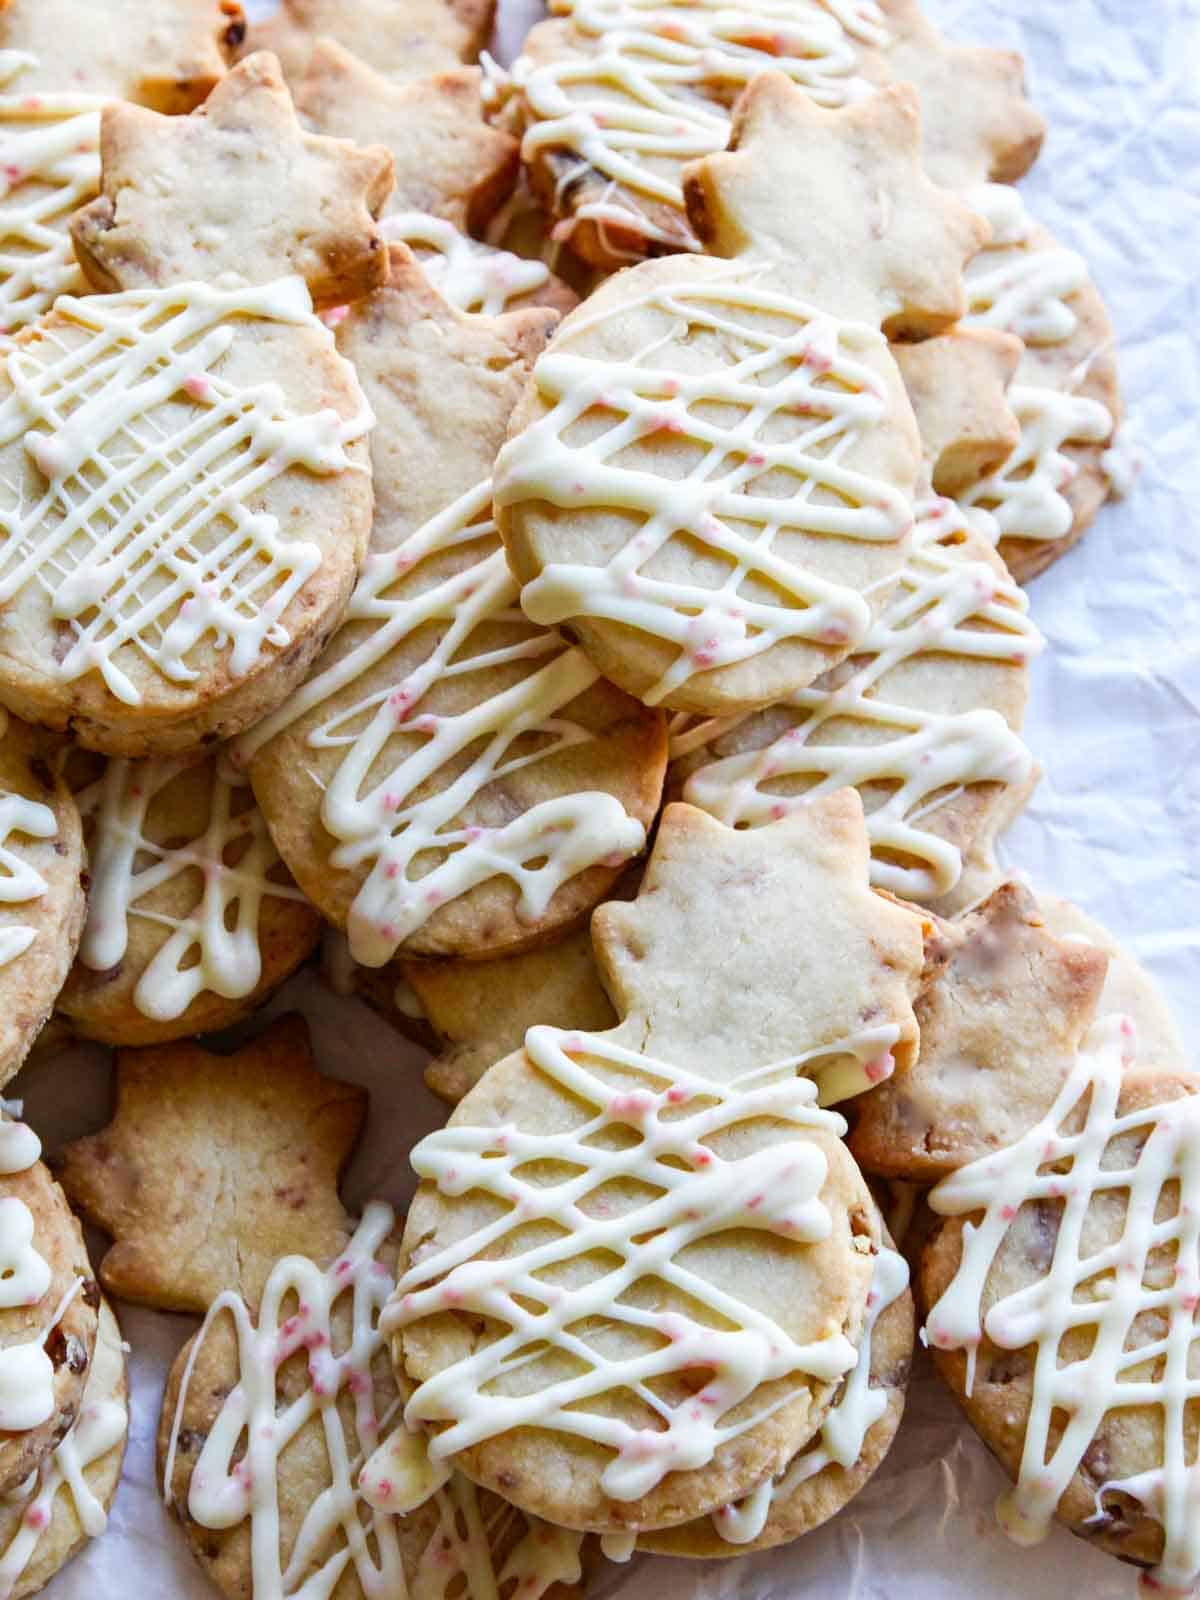 A plate of peppermint icing drizzled shortbread Christmas cookies.